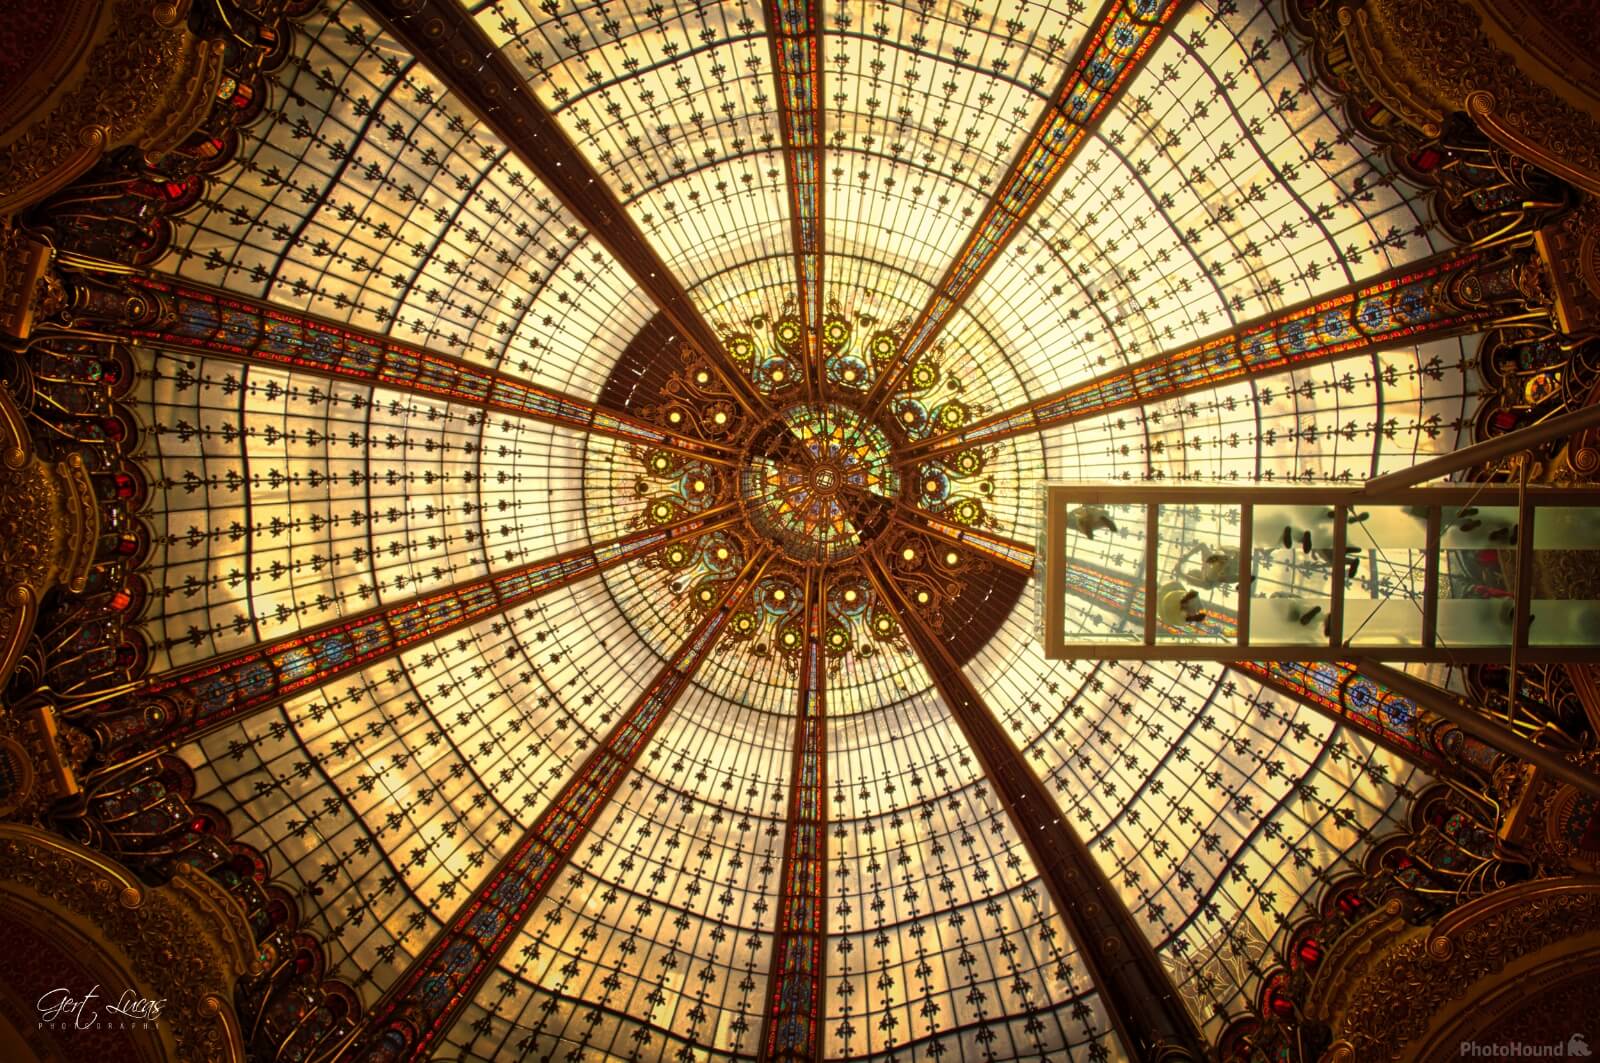 Image of Galeries Lafayette by Gert Lucas